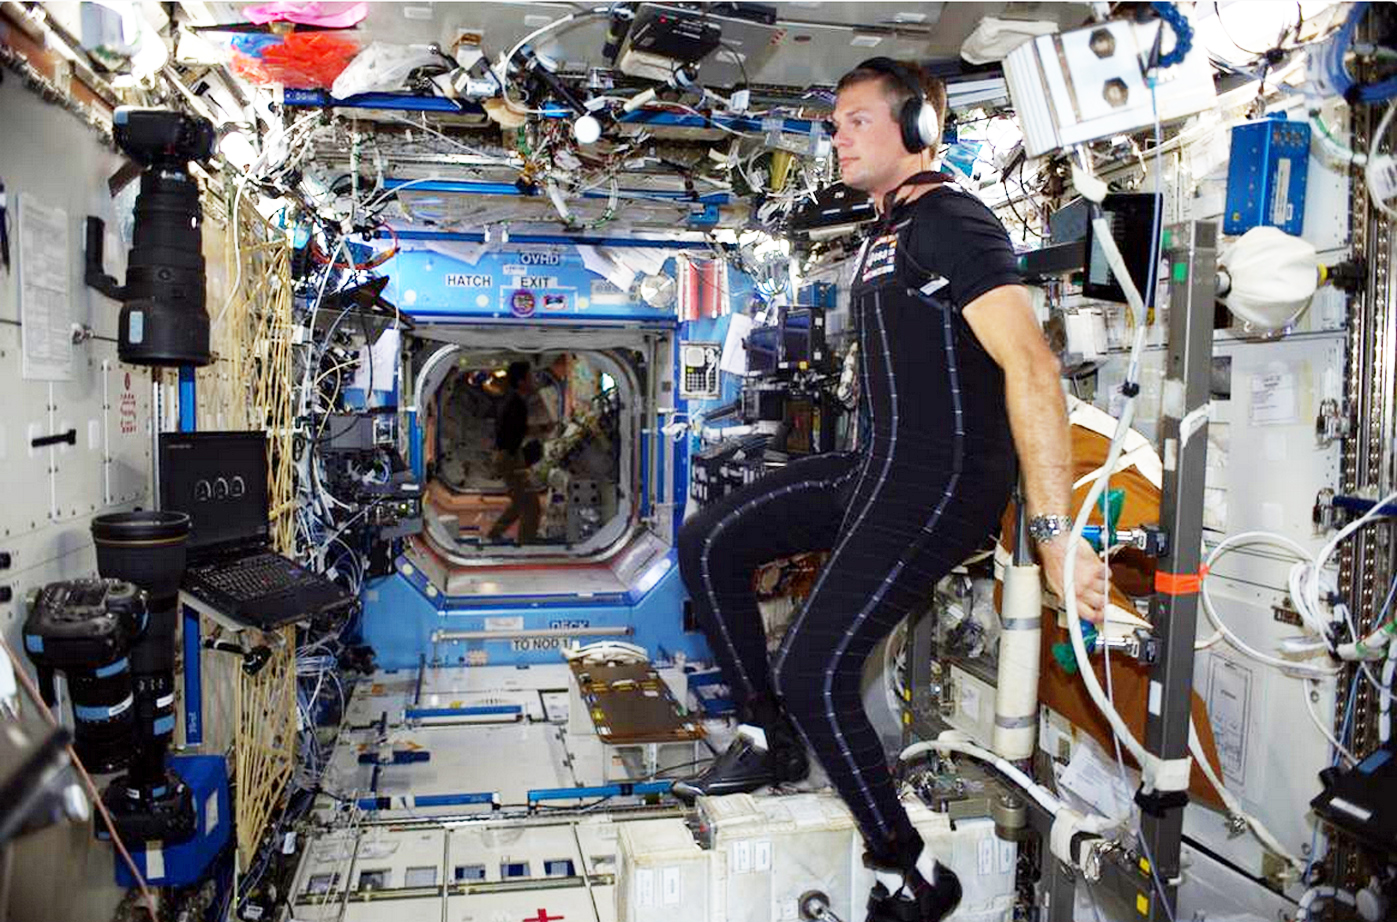 Denmark's first astronaut, Andreas Mogensen, trials an earlier version of the skinsuit on the ISS in 2015 to test its effectiveness in the weightless conditions.